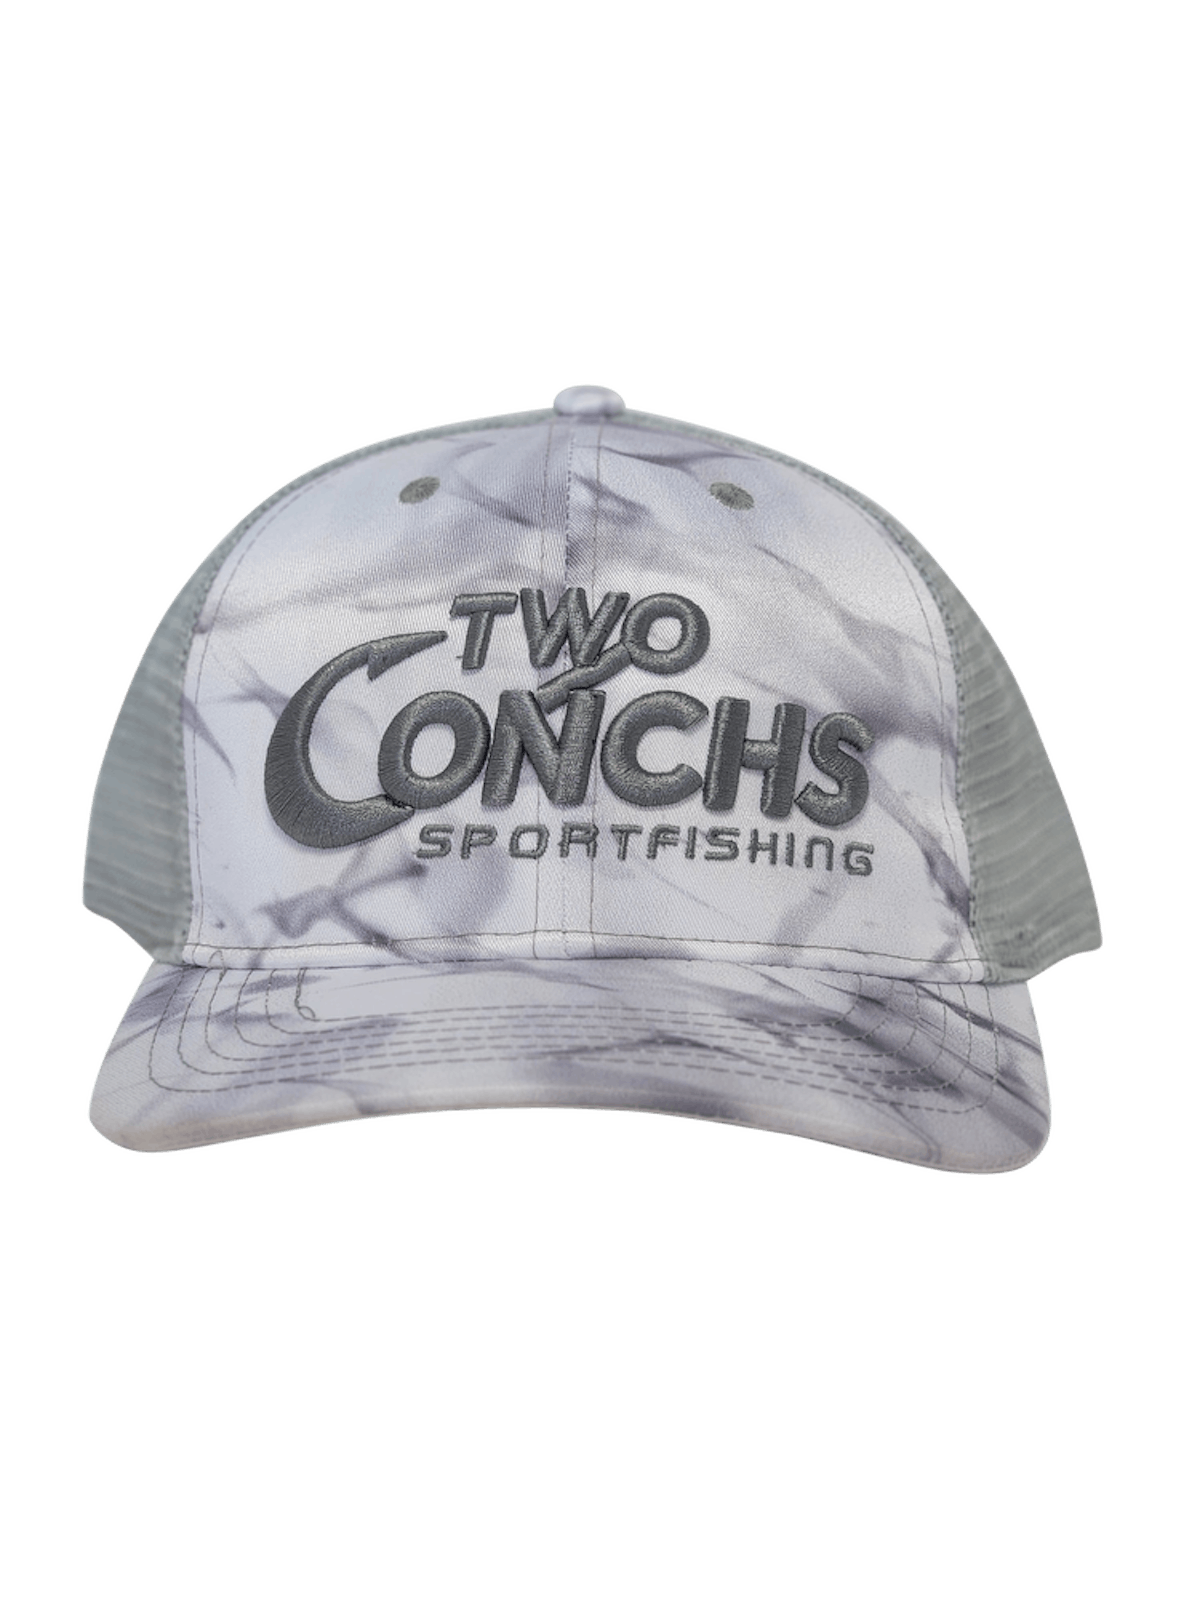 Two Conchs Sportfishing, (Special Invitation Offer)